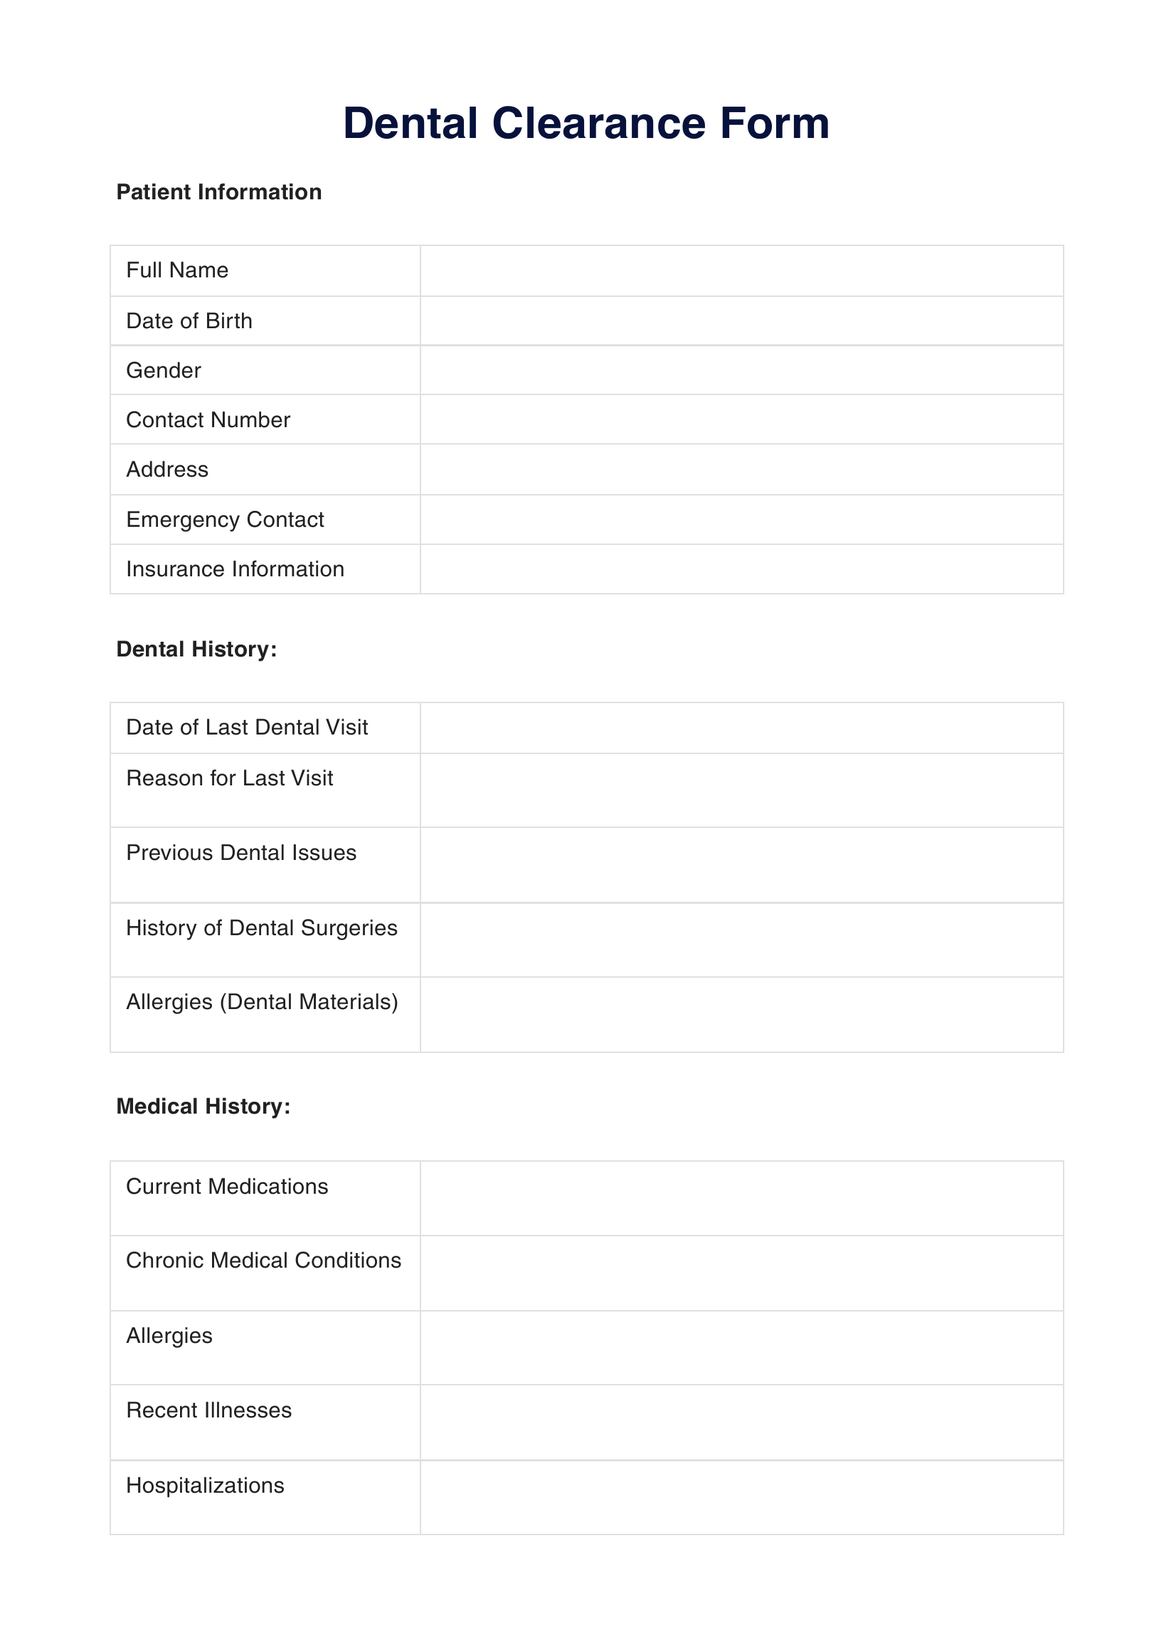 Dental Clearance Form PDF Example